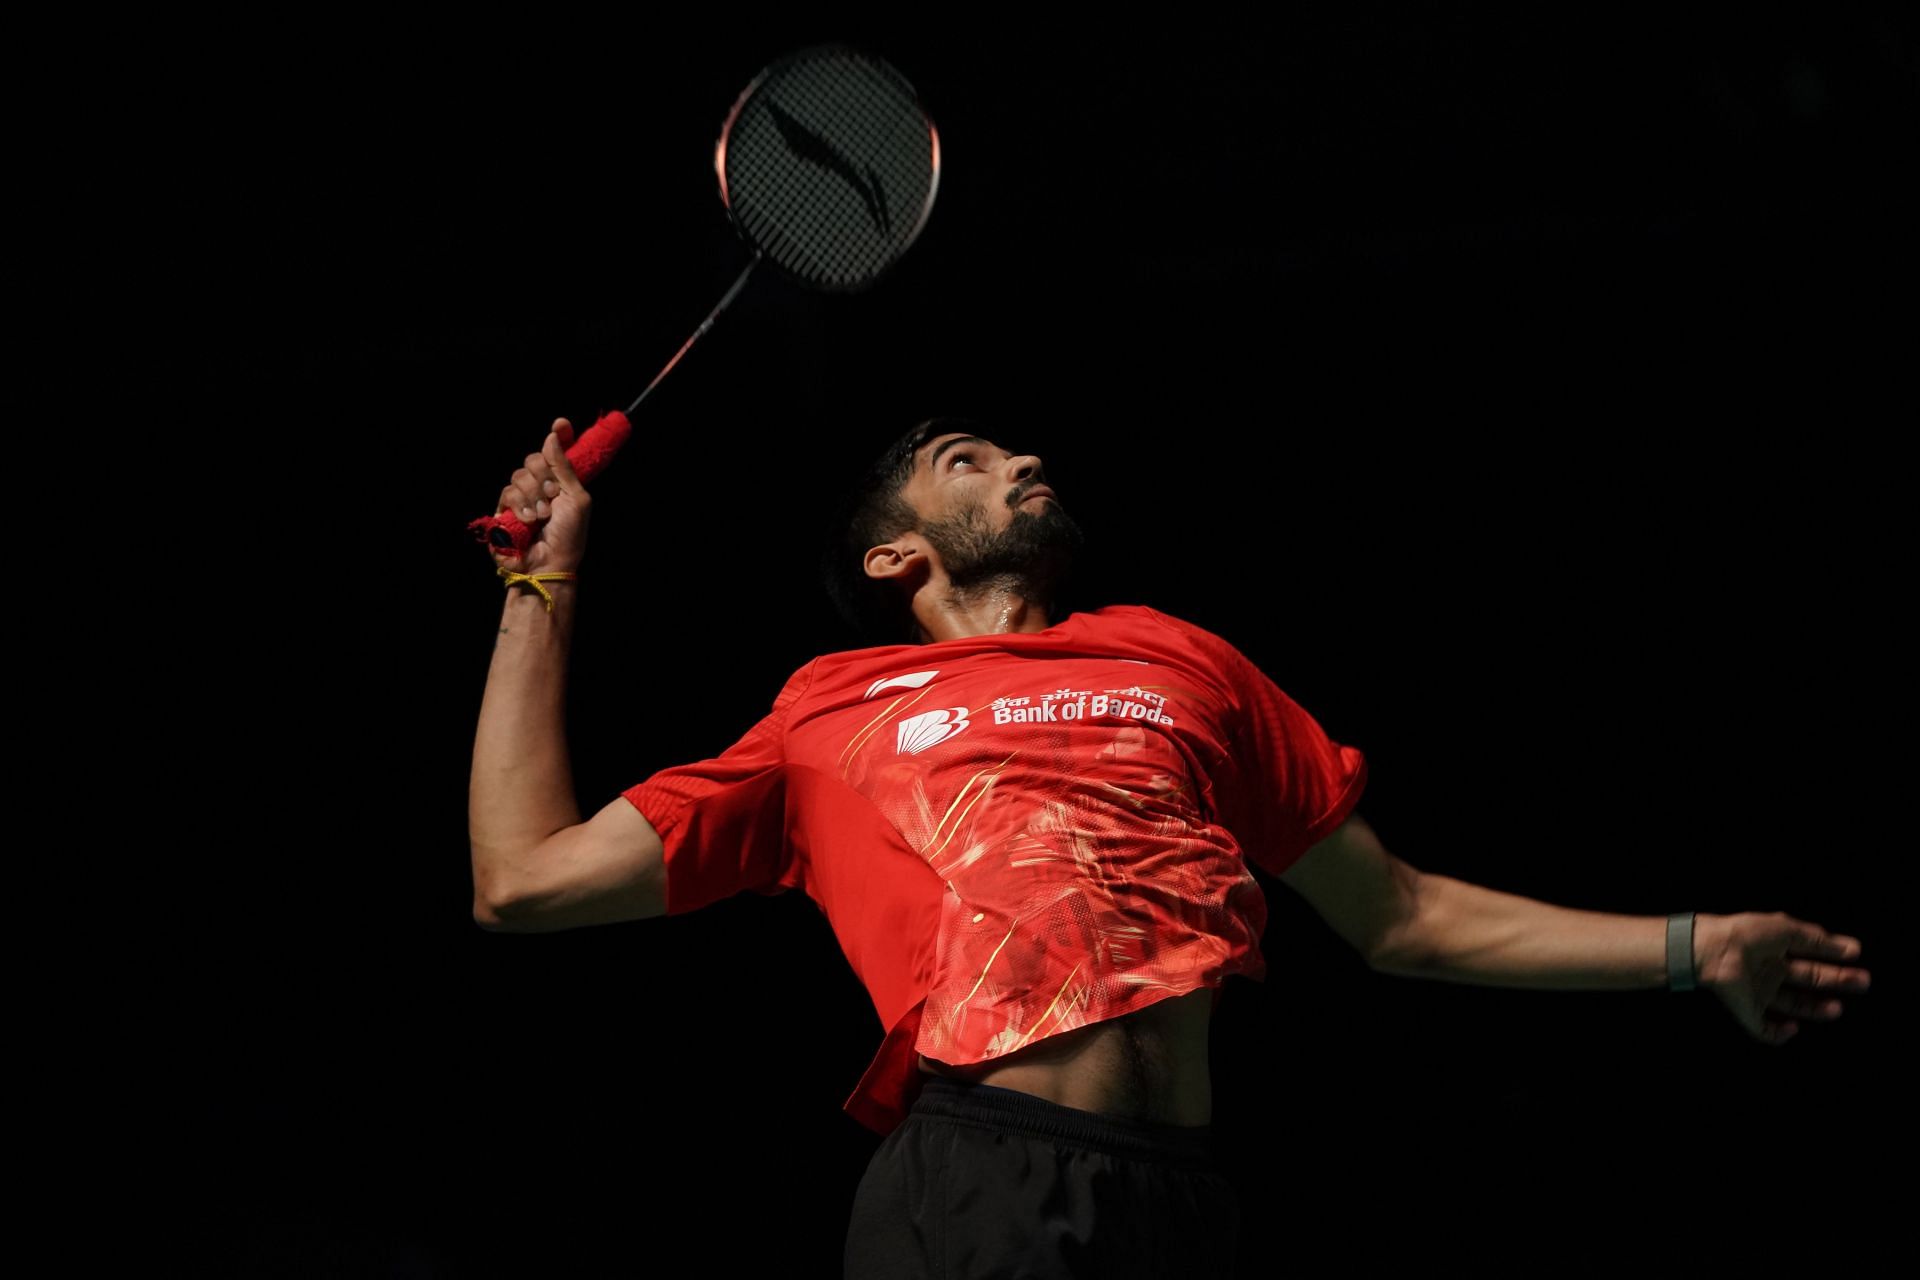 Kidambi Srikanth has been in top form